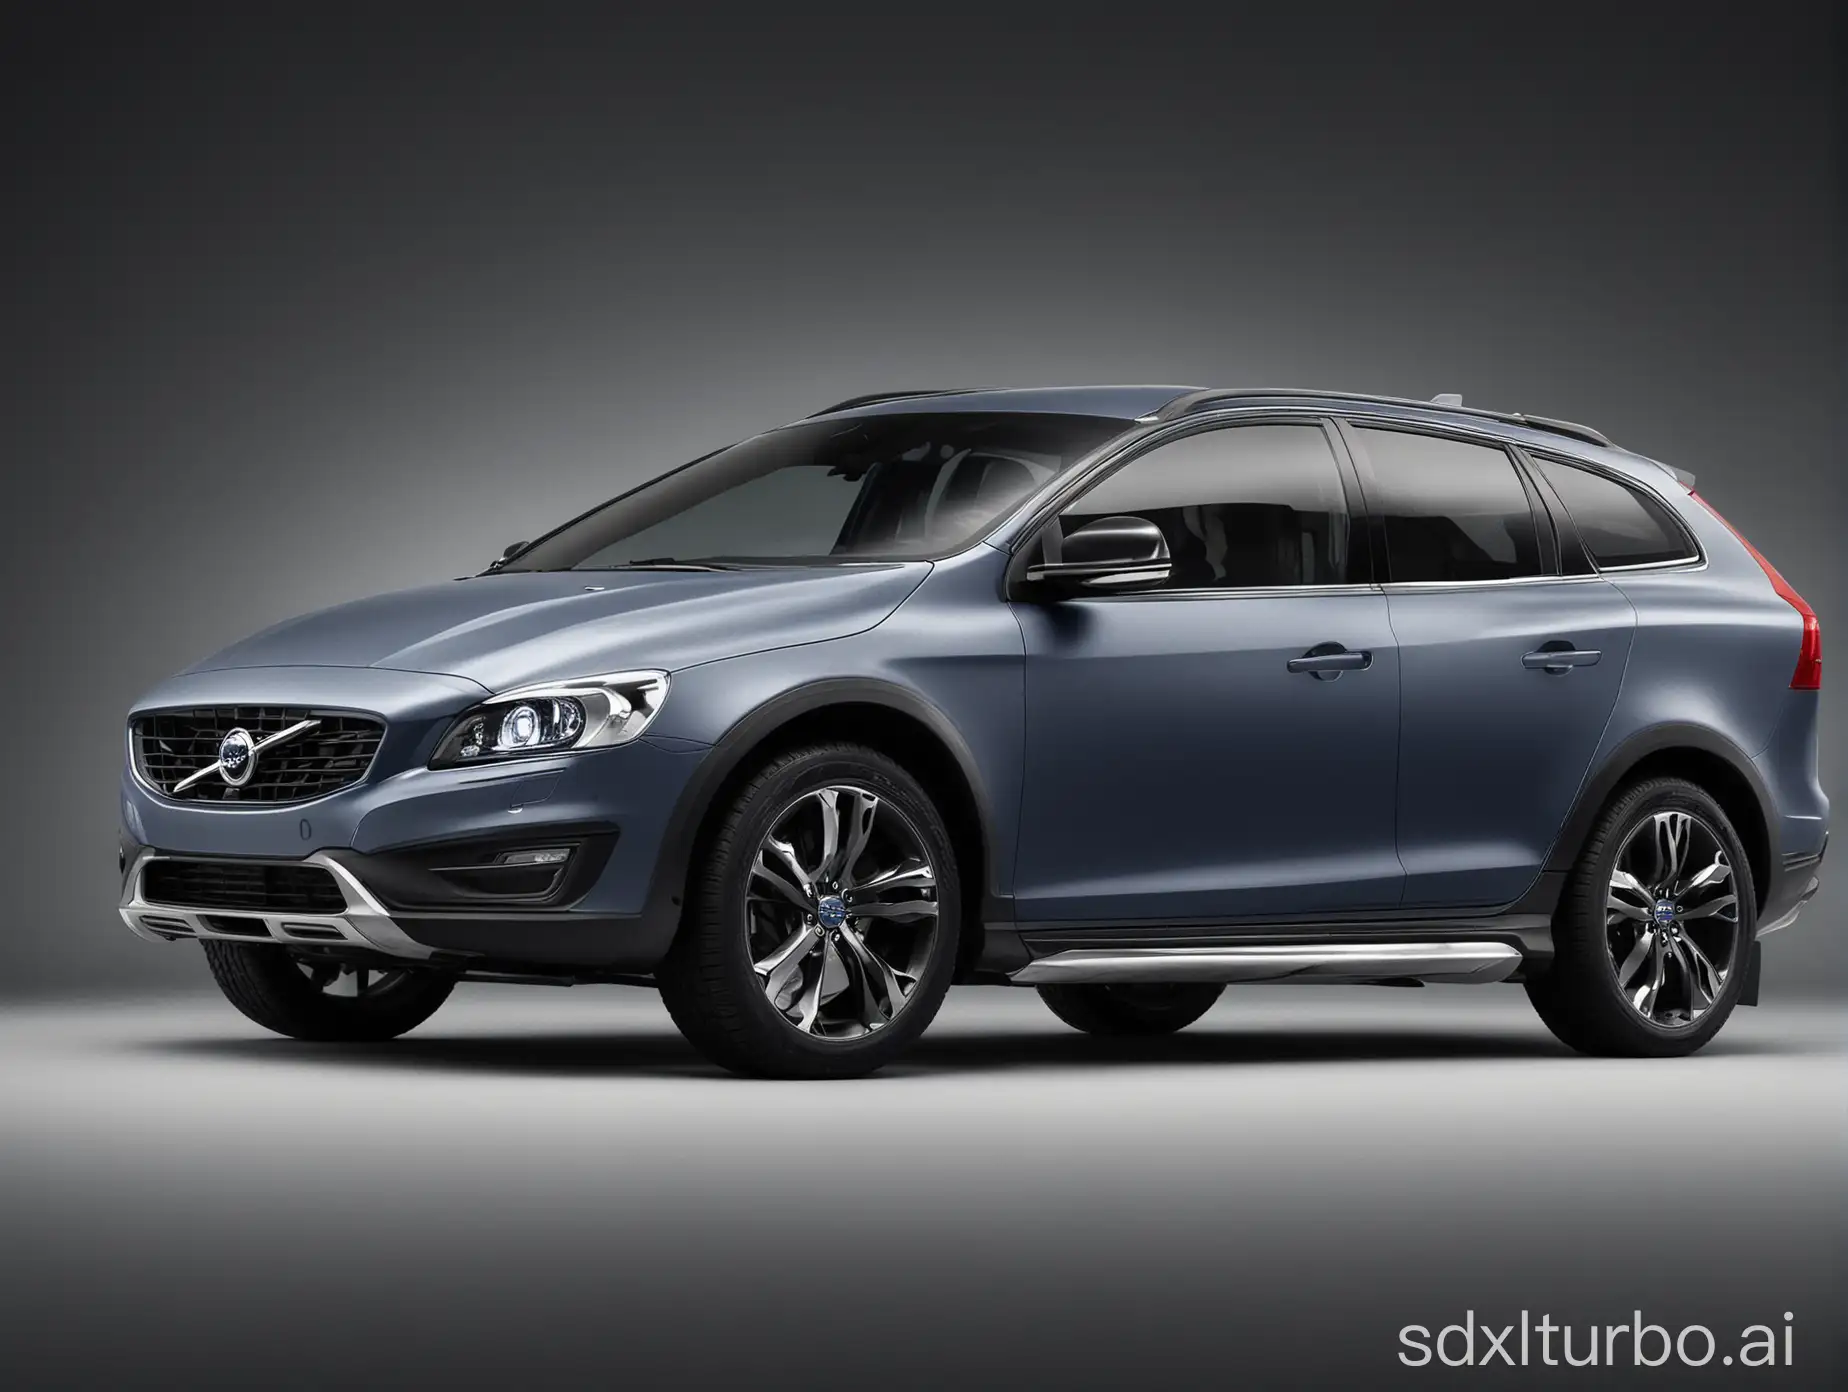 Professional-Studio-Closeup-Portrait-of-2012-Volvo-V60-Cross-Country-in-Matte-Ash-Grey-with-Dark-Blue-Accent